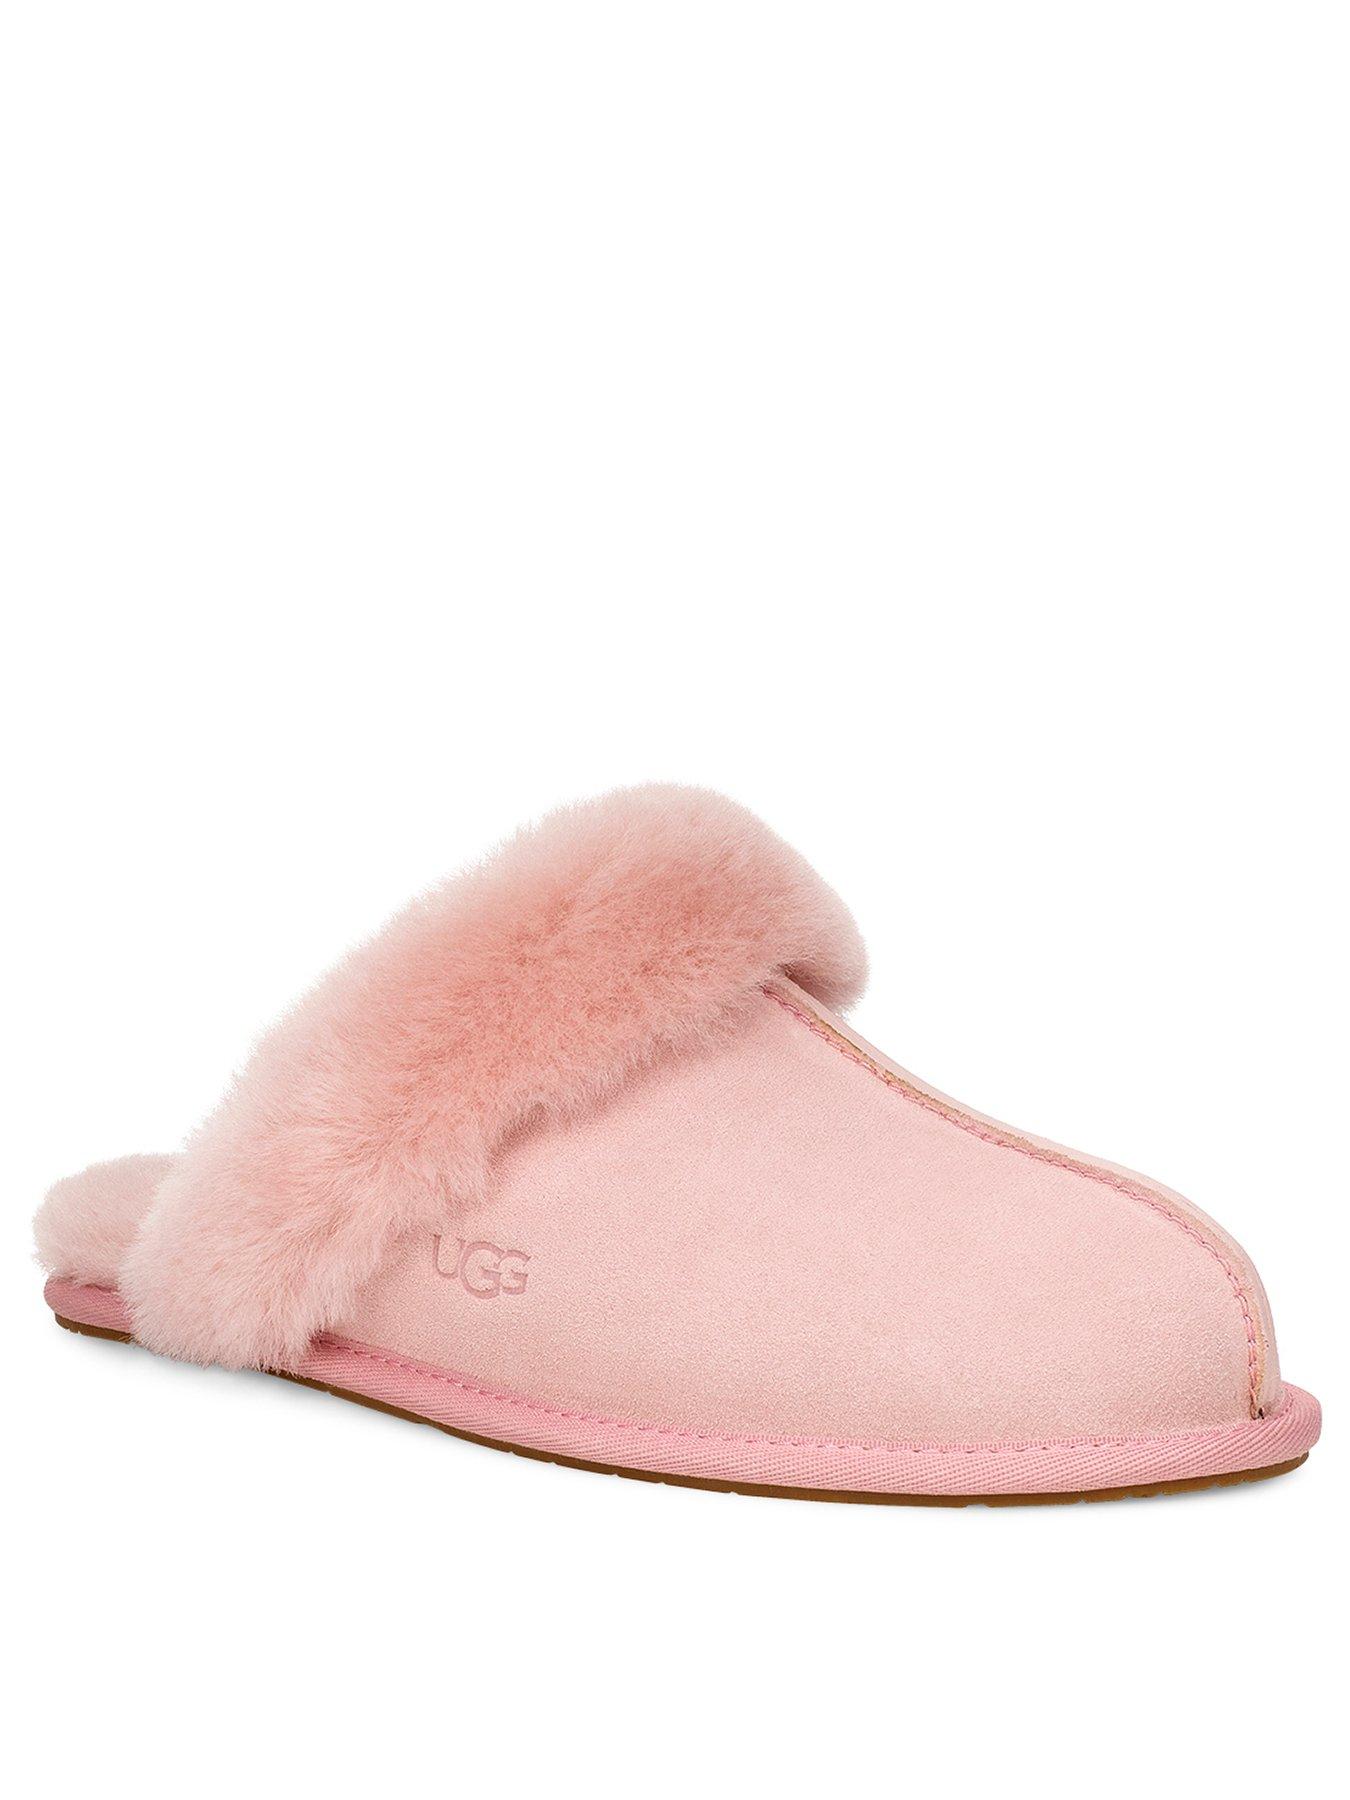 pink ugg slippers scuffette 